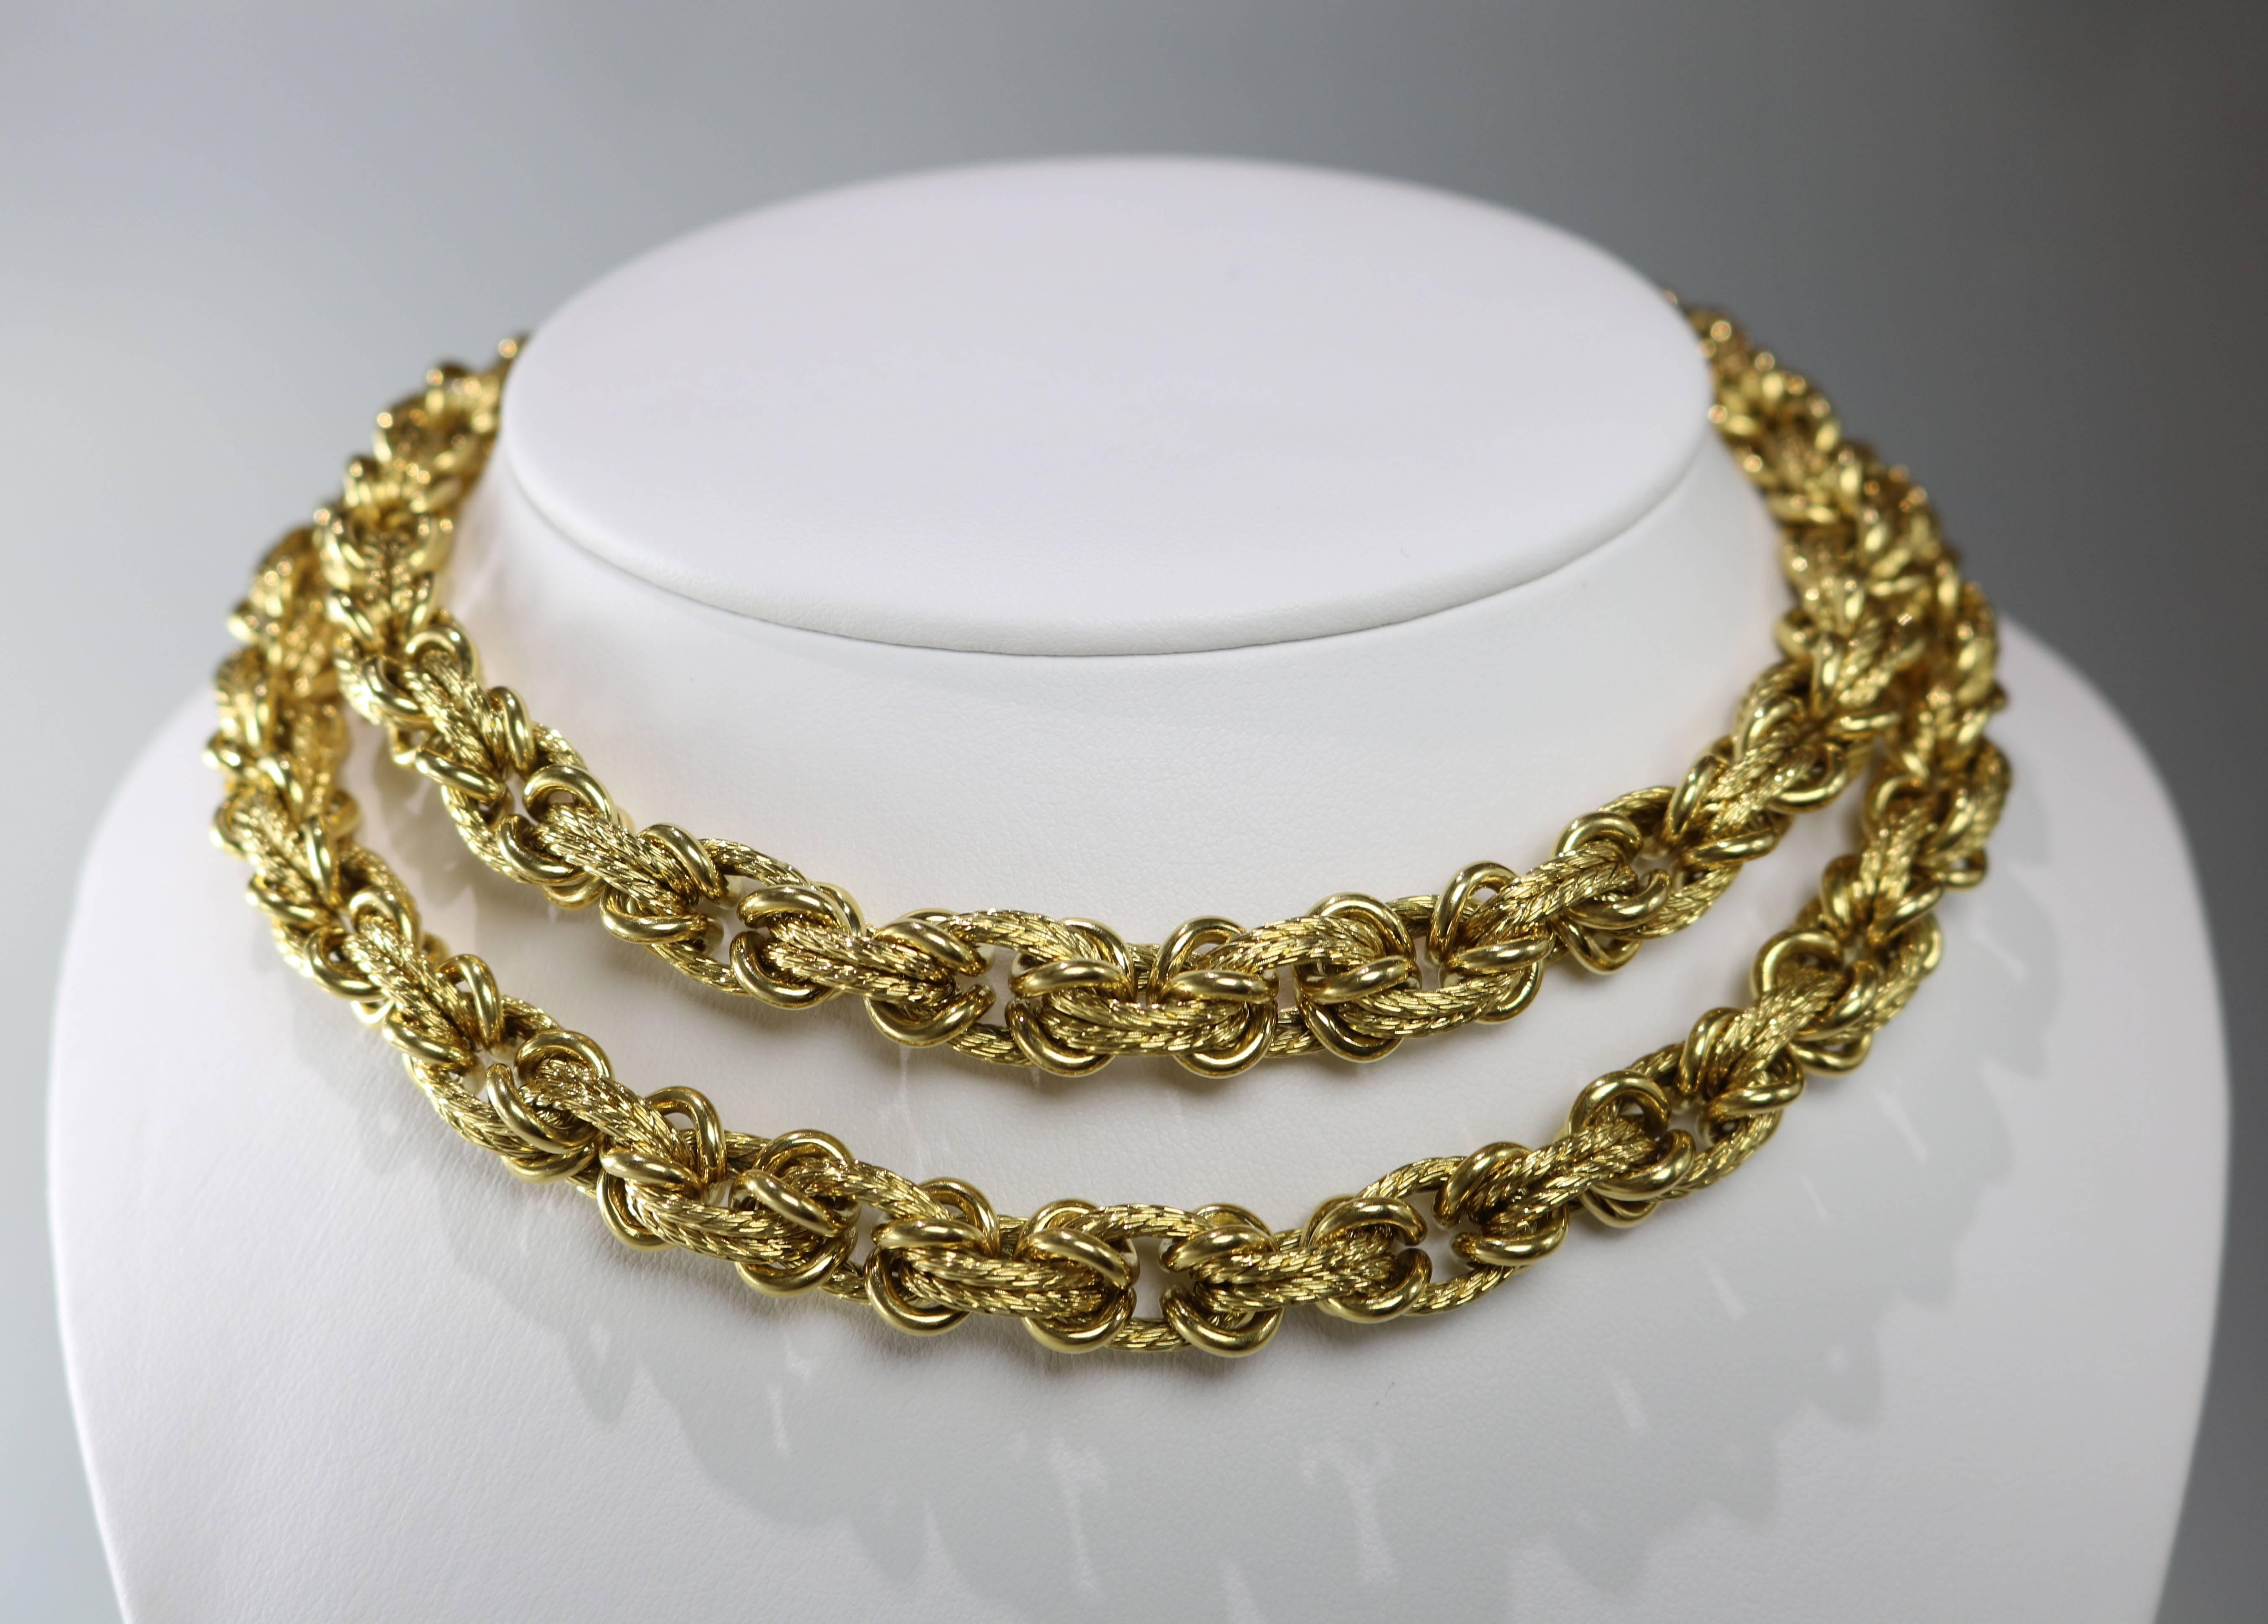 Desirable 30 inch long Van Cleef & Arpels gold chain necklace from the 1970's. 
A combination of high polish and woven rope links result in a classic look. 
The necklace is stamped VCA, a serial number, a European  hallmark and 18K gold. It is